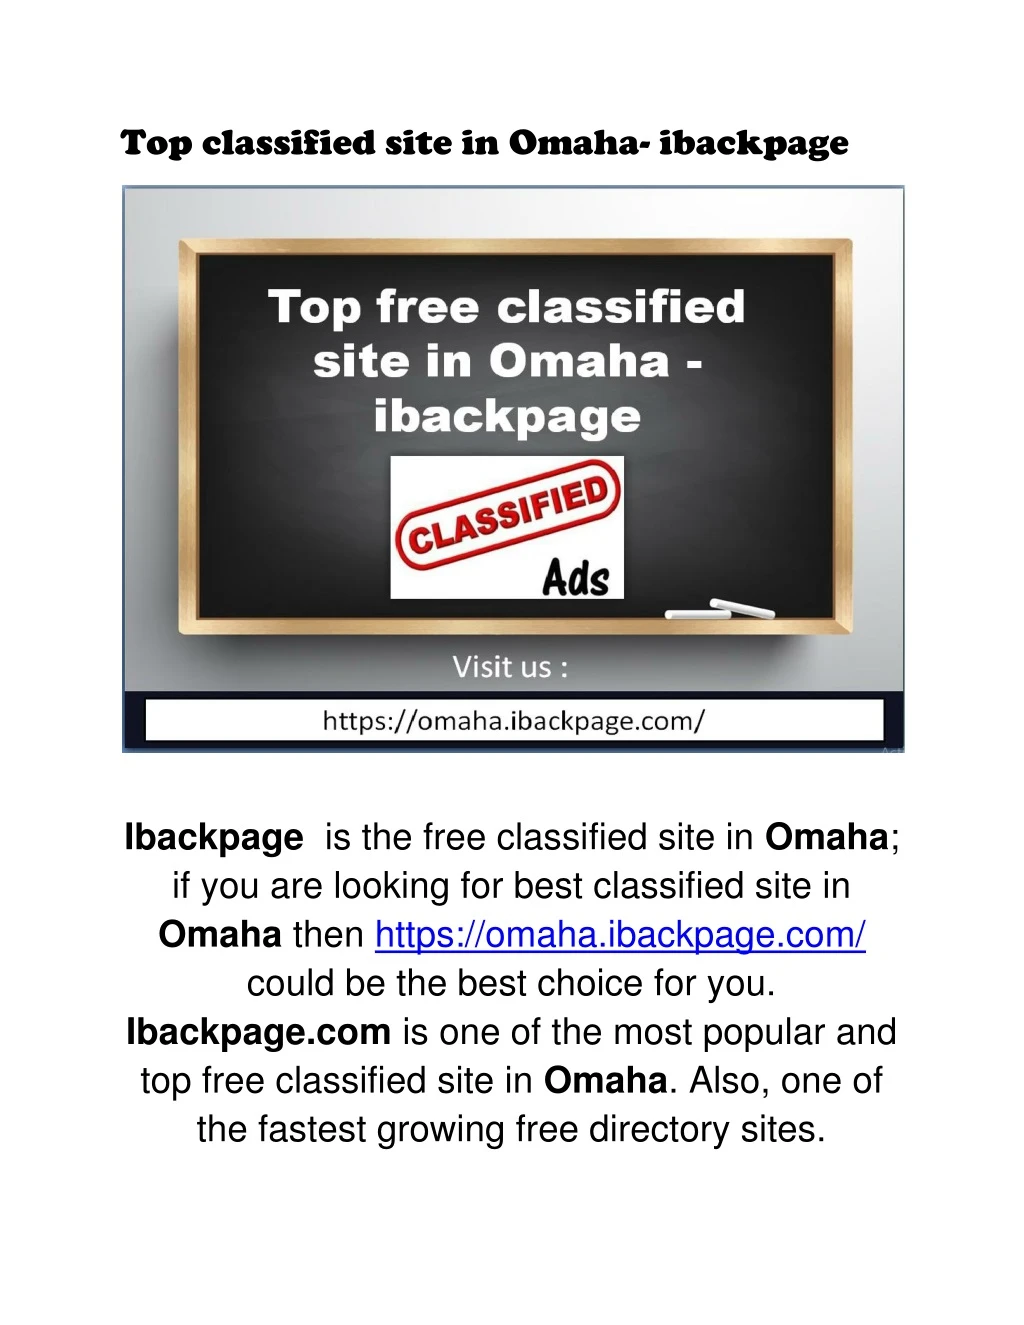 top classified site in omaha ibackpage